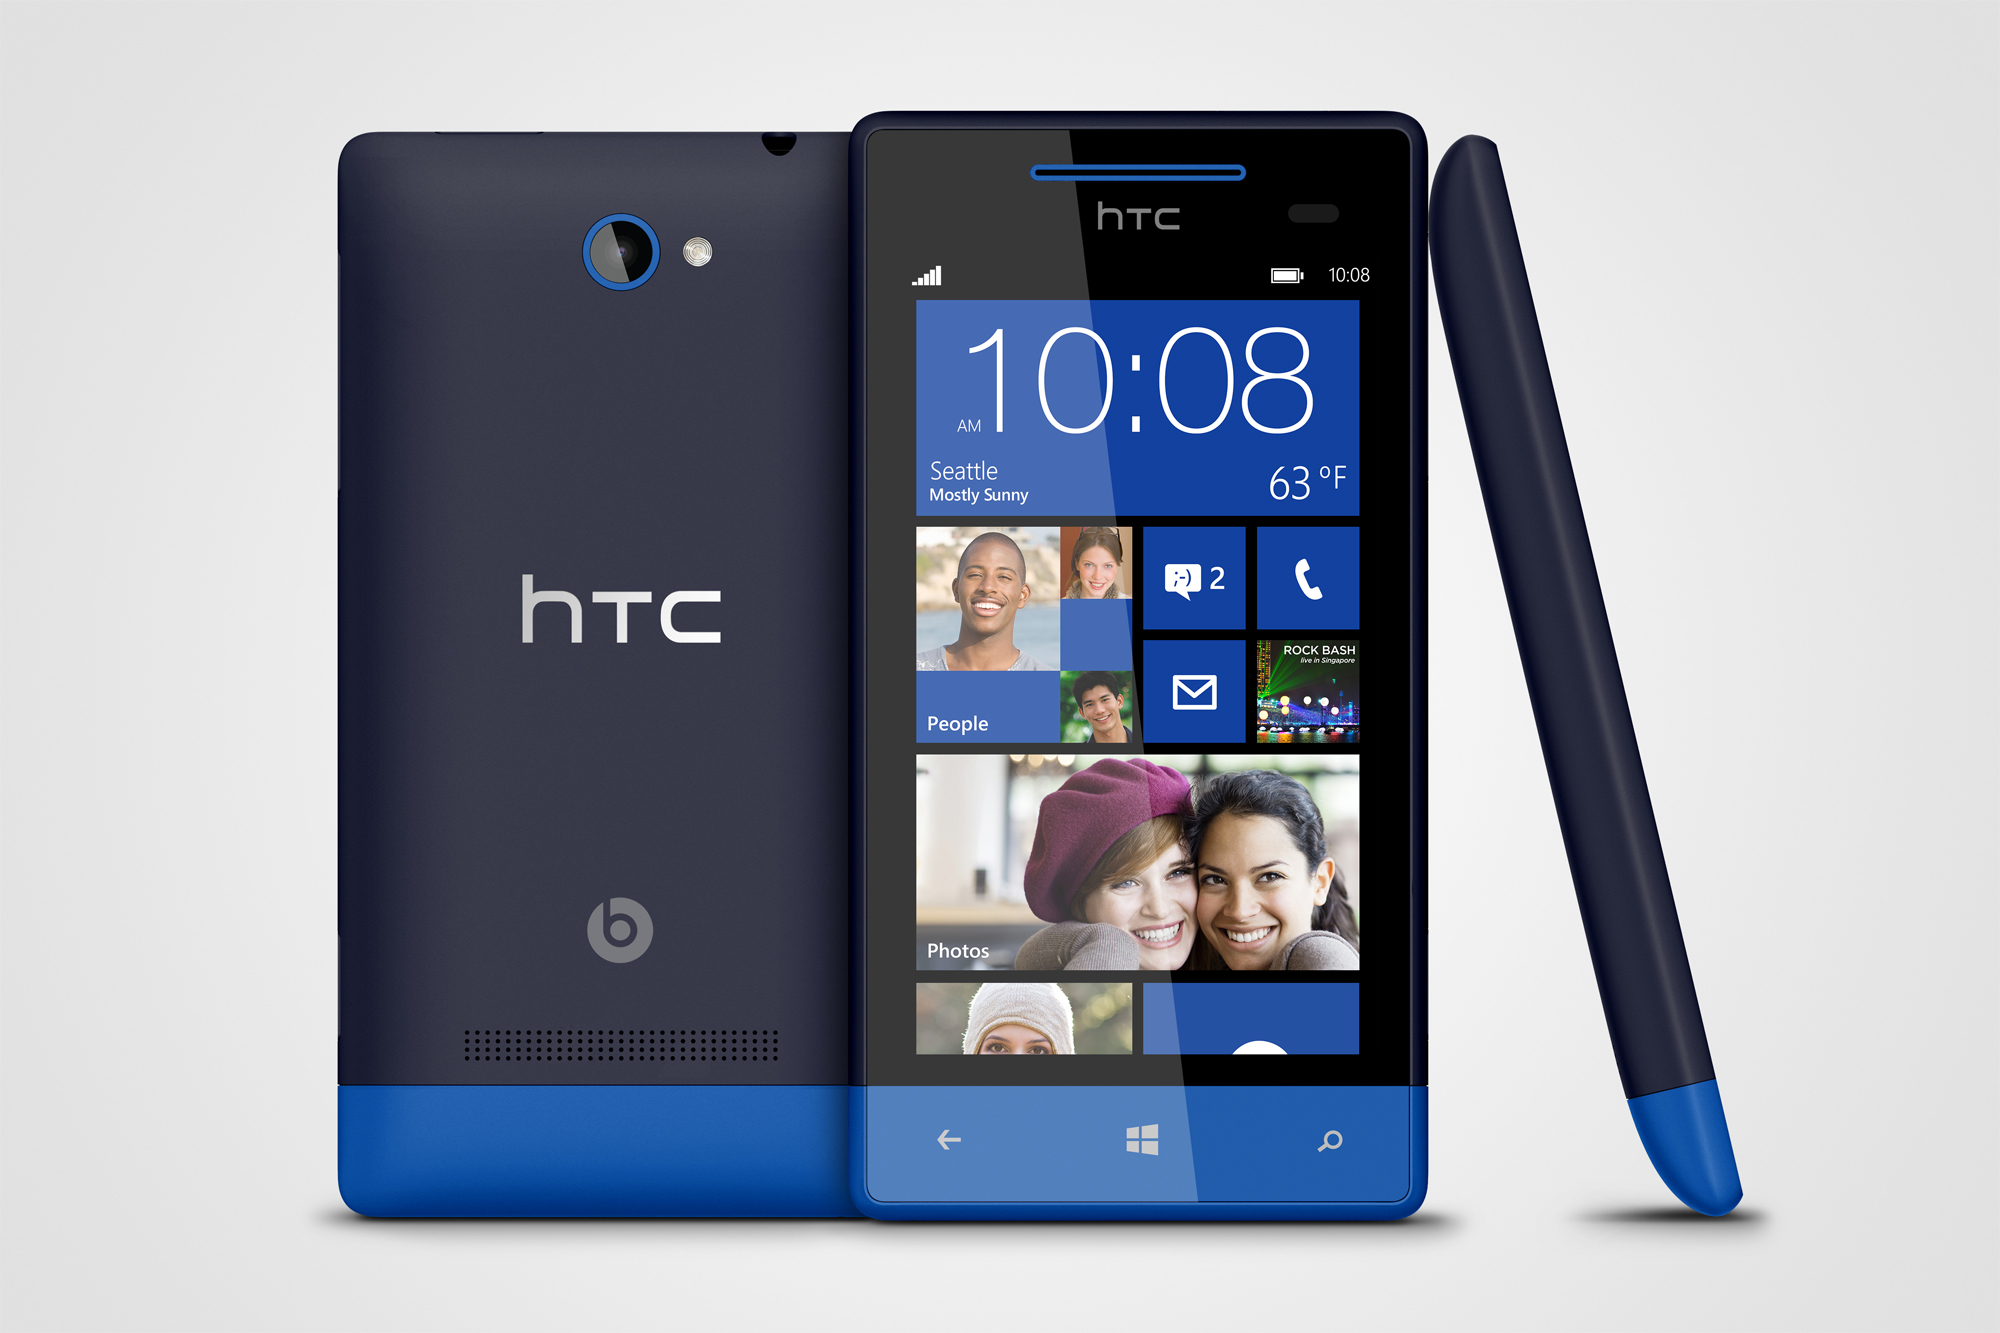 Htc Sync No Device Connected Windows 8